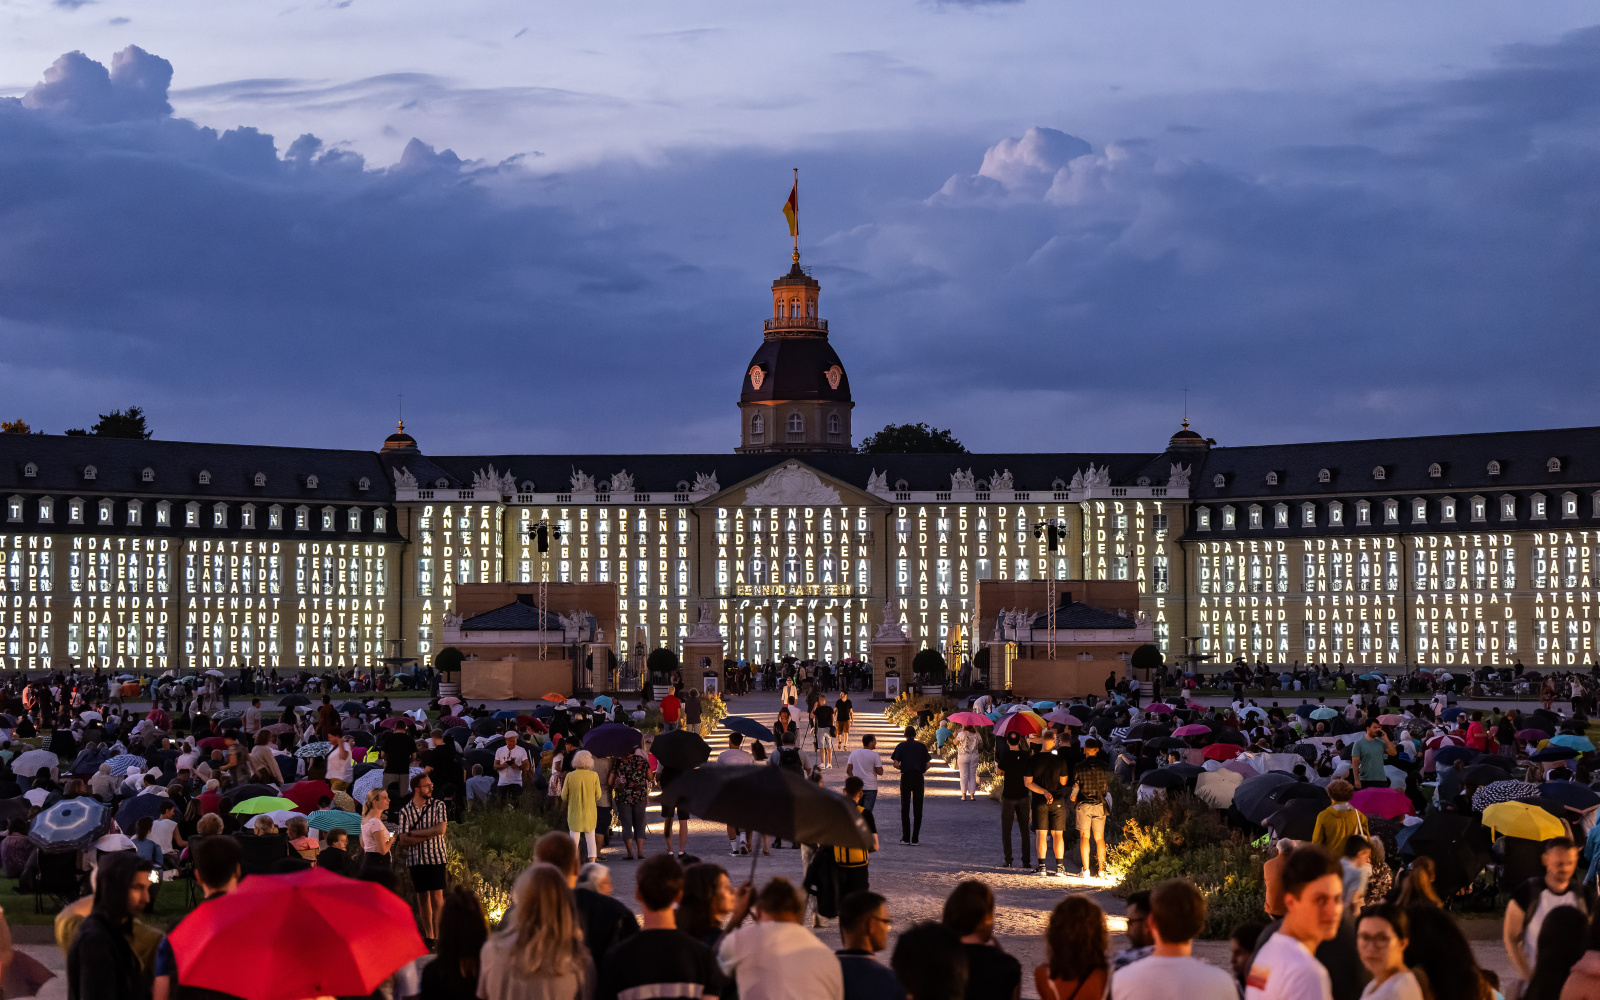 The façade of the baroque palace in Karlsruhe can be seen. Peter Weibel's show "We are data" will be projected. The castle has a dark background and the words "Daten" (data) are written many times in white letters.